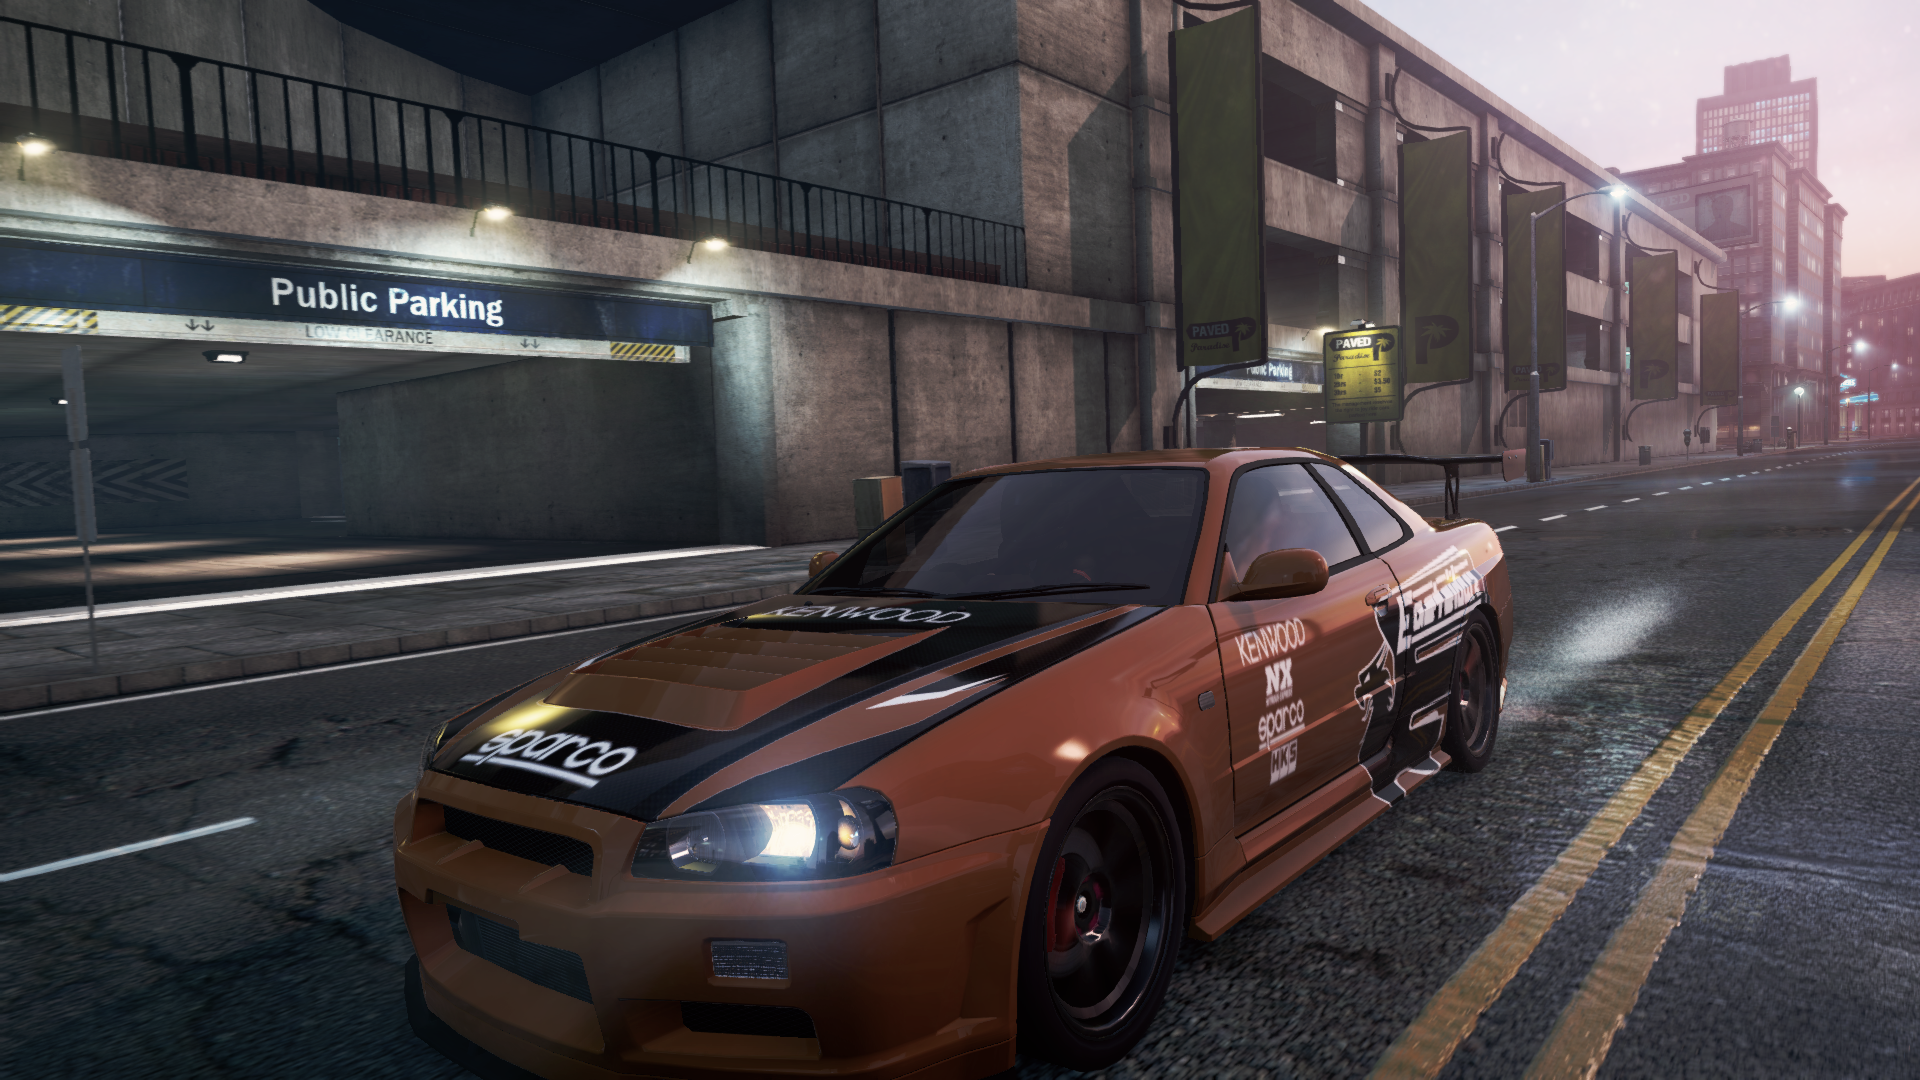 Nfs most wanted fix crashes the game. · issue #430 · thirteenag/widescreenfixespack · github